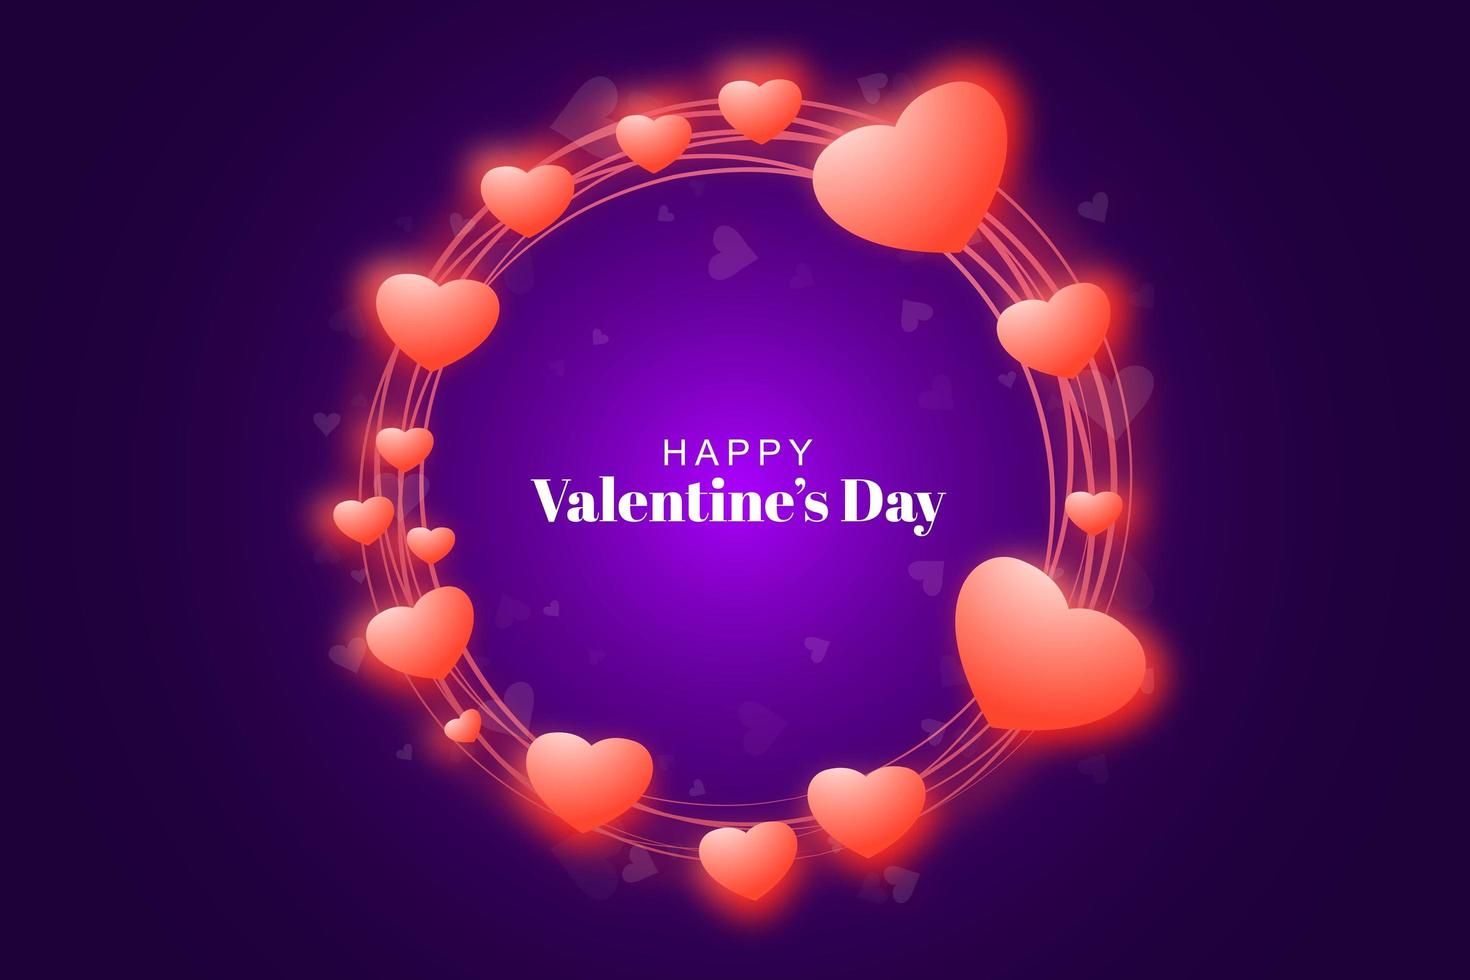 Shiny frame with hearts for valentine's day on purple glowing background